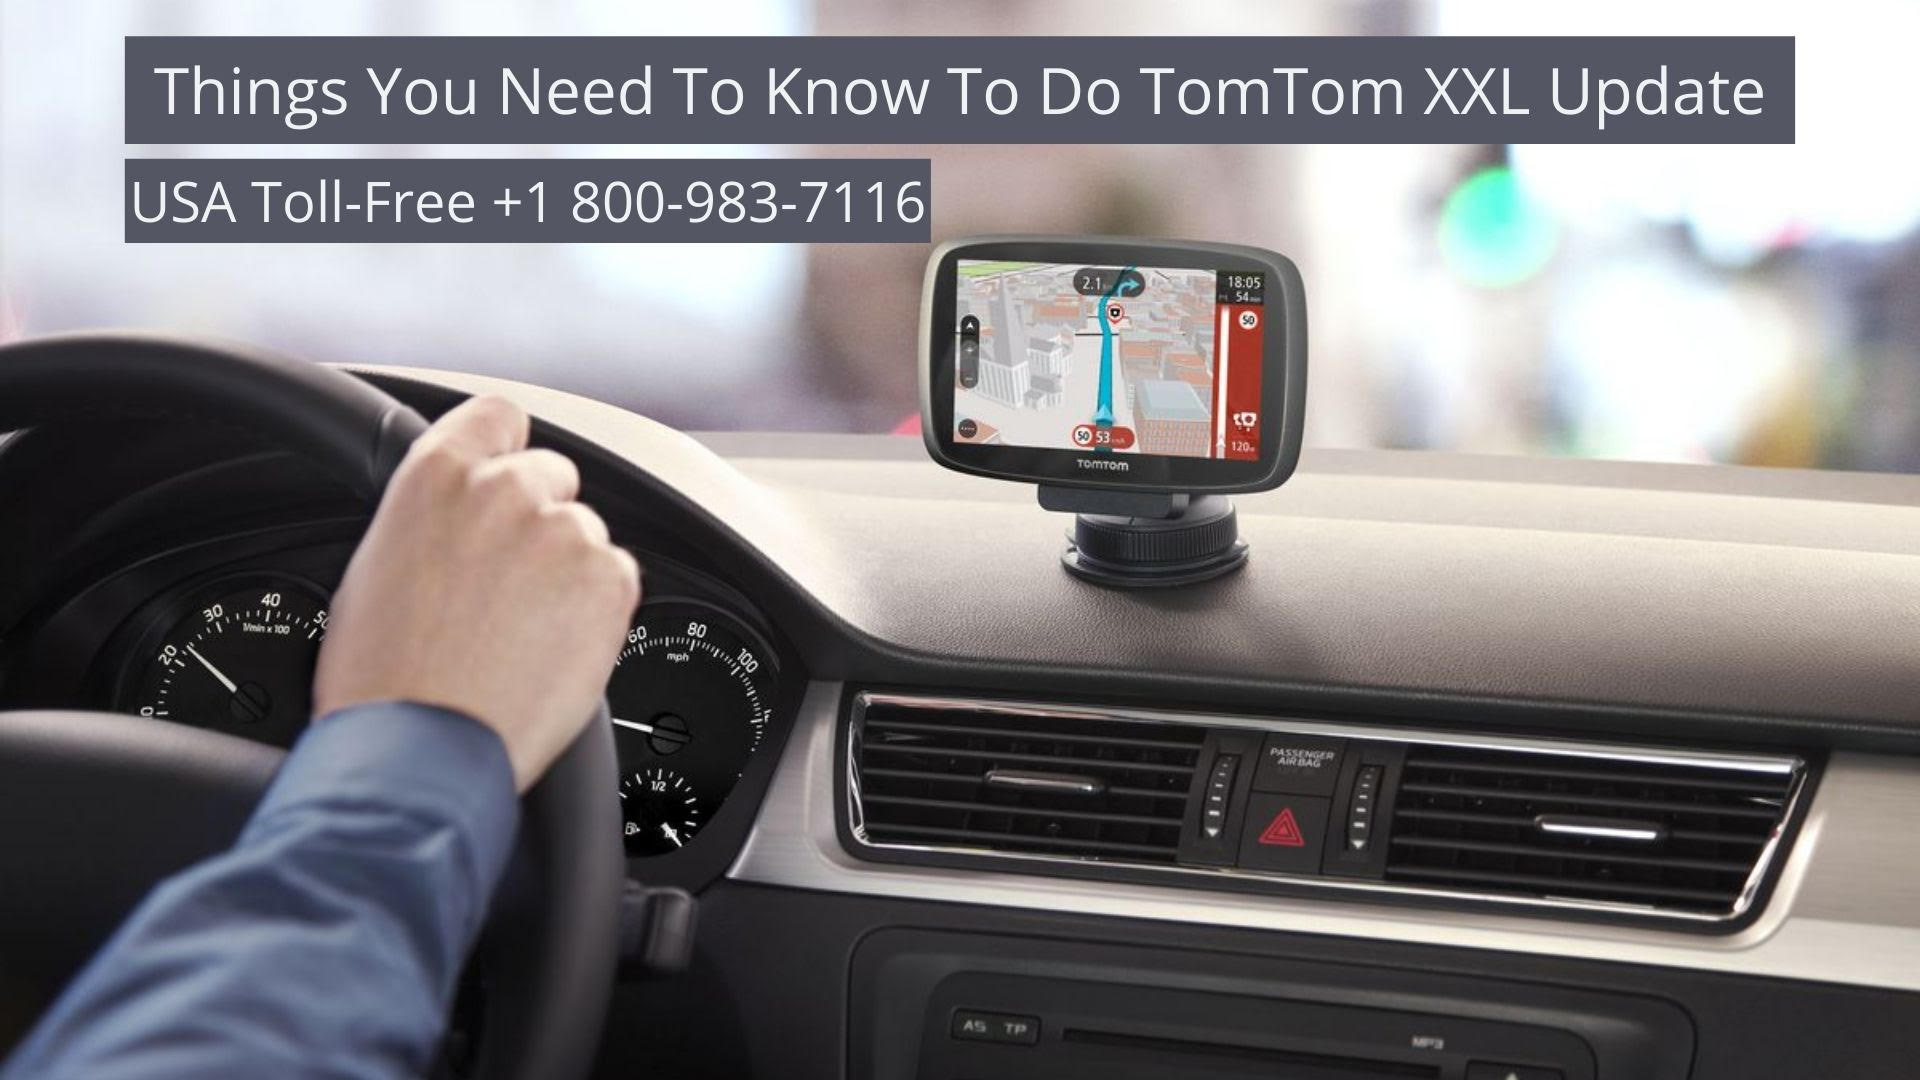 How to Update Tomtom XXL Device? Call 18009837116